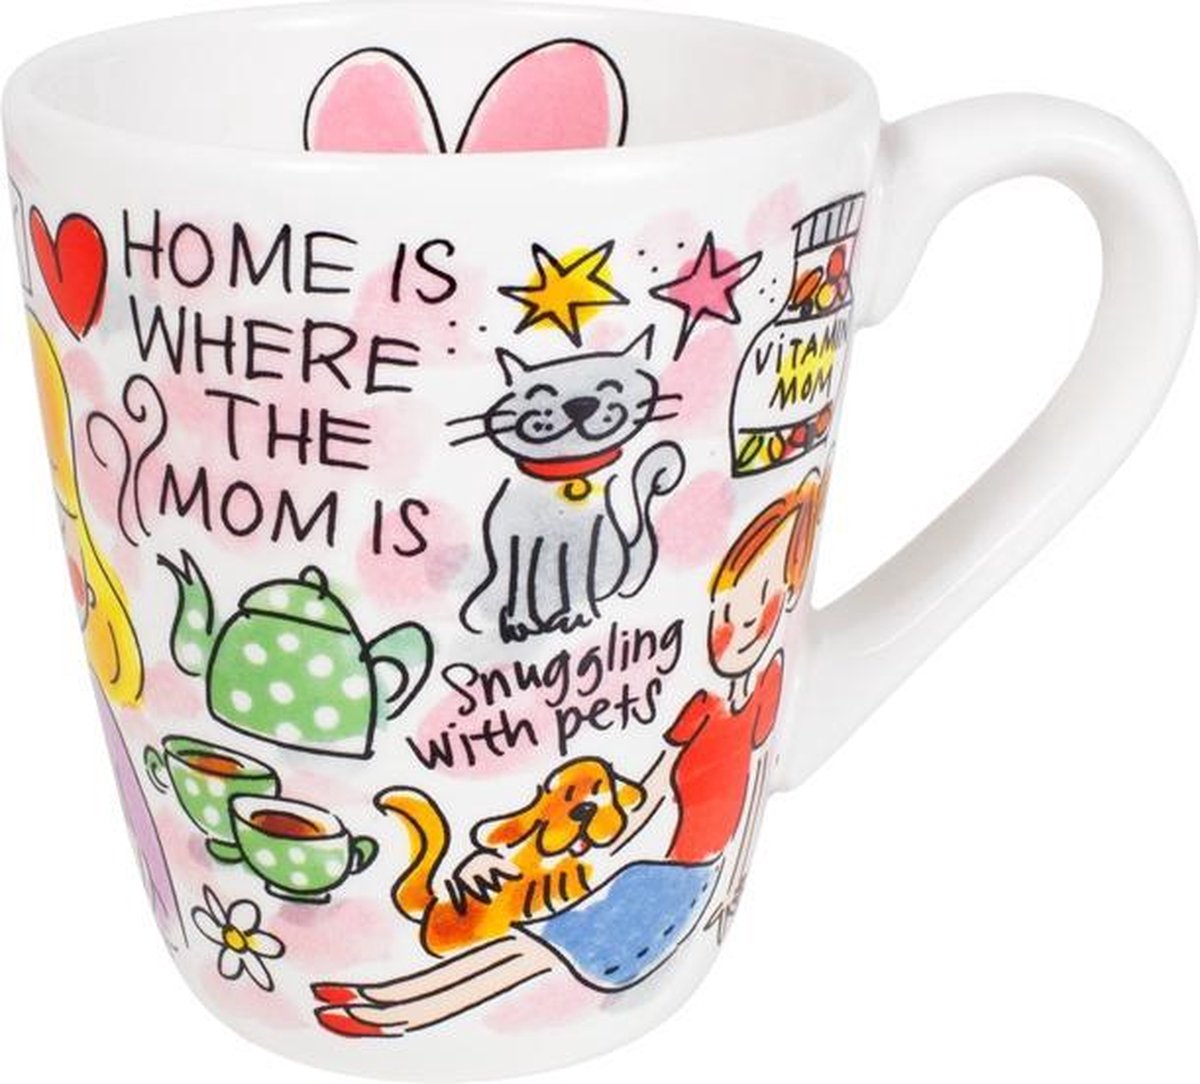 Blond Amsterdam Mok - Home is where the mom is Love - 350 ml - Blond Amsterdam